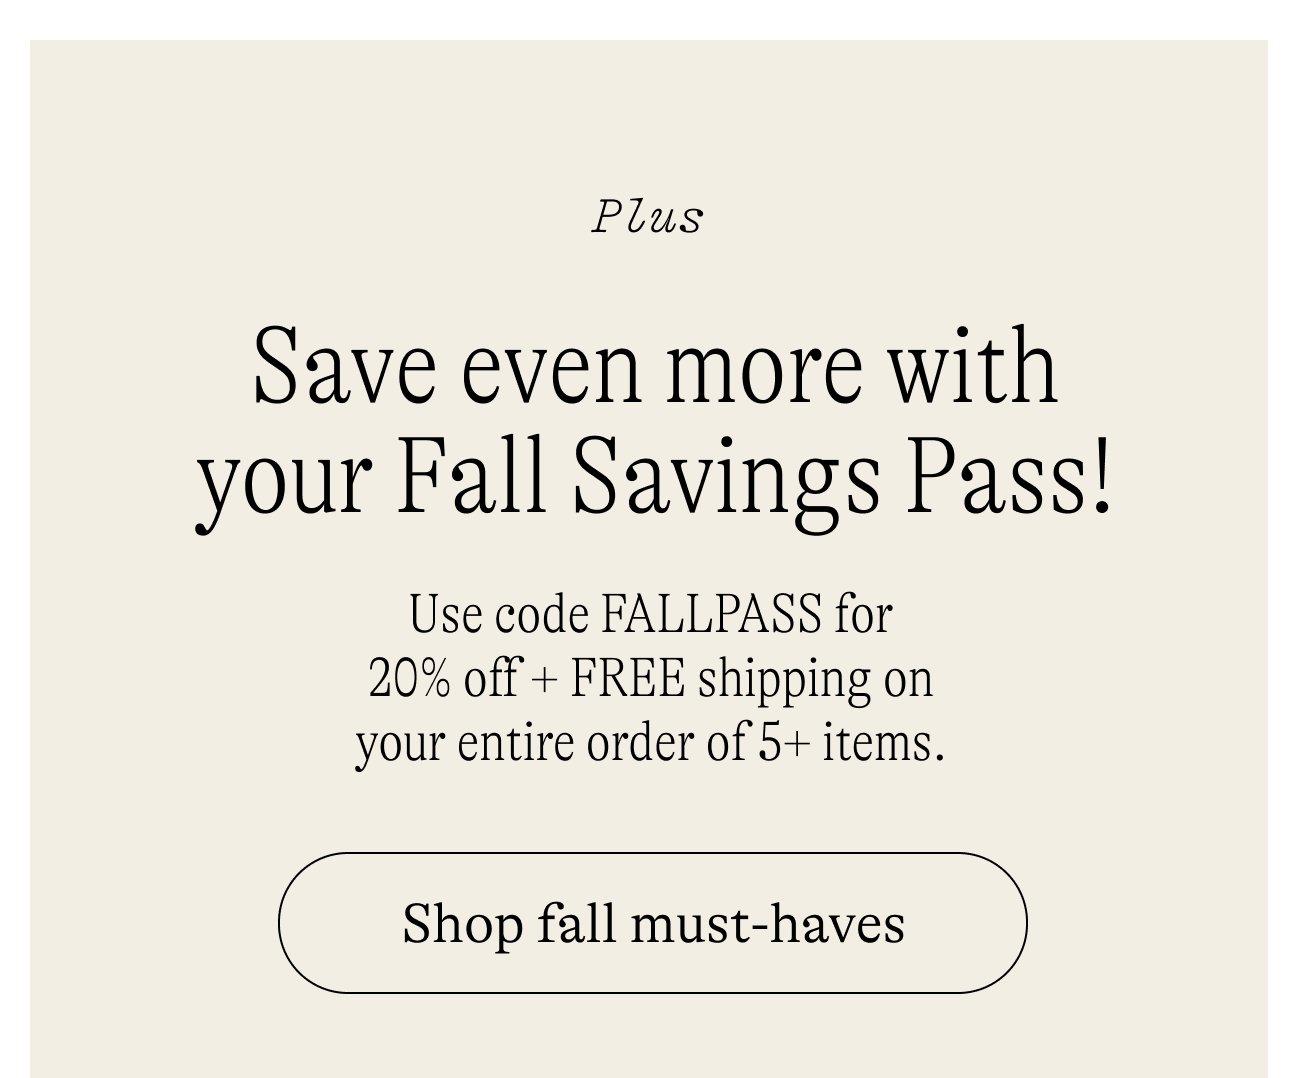 Save even more with your Fall Savings Pass! Use code FALLPASS for 20% off + FREE shipping on your entire order of 5+ items. Shop fall must-haves